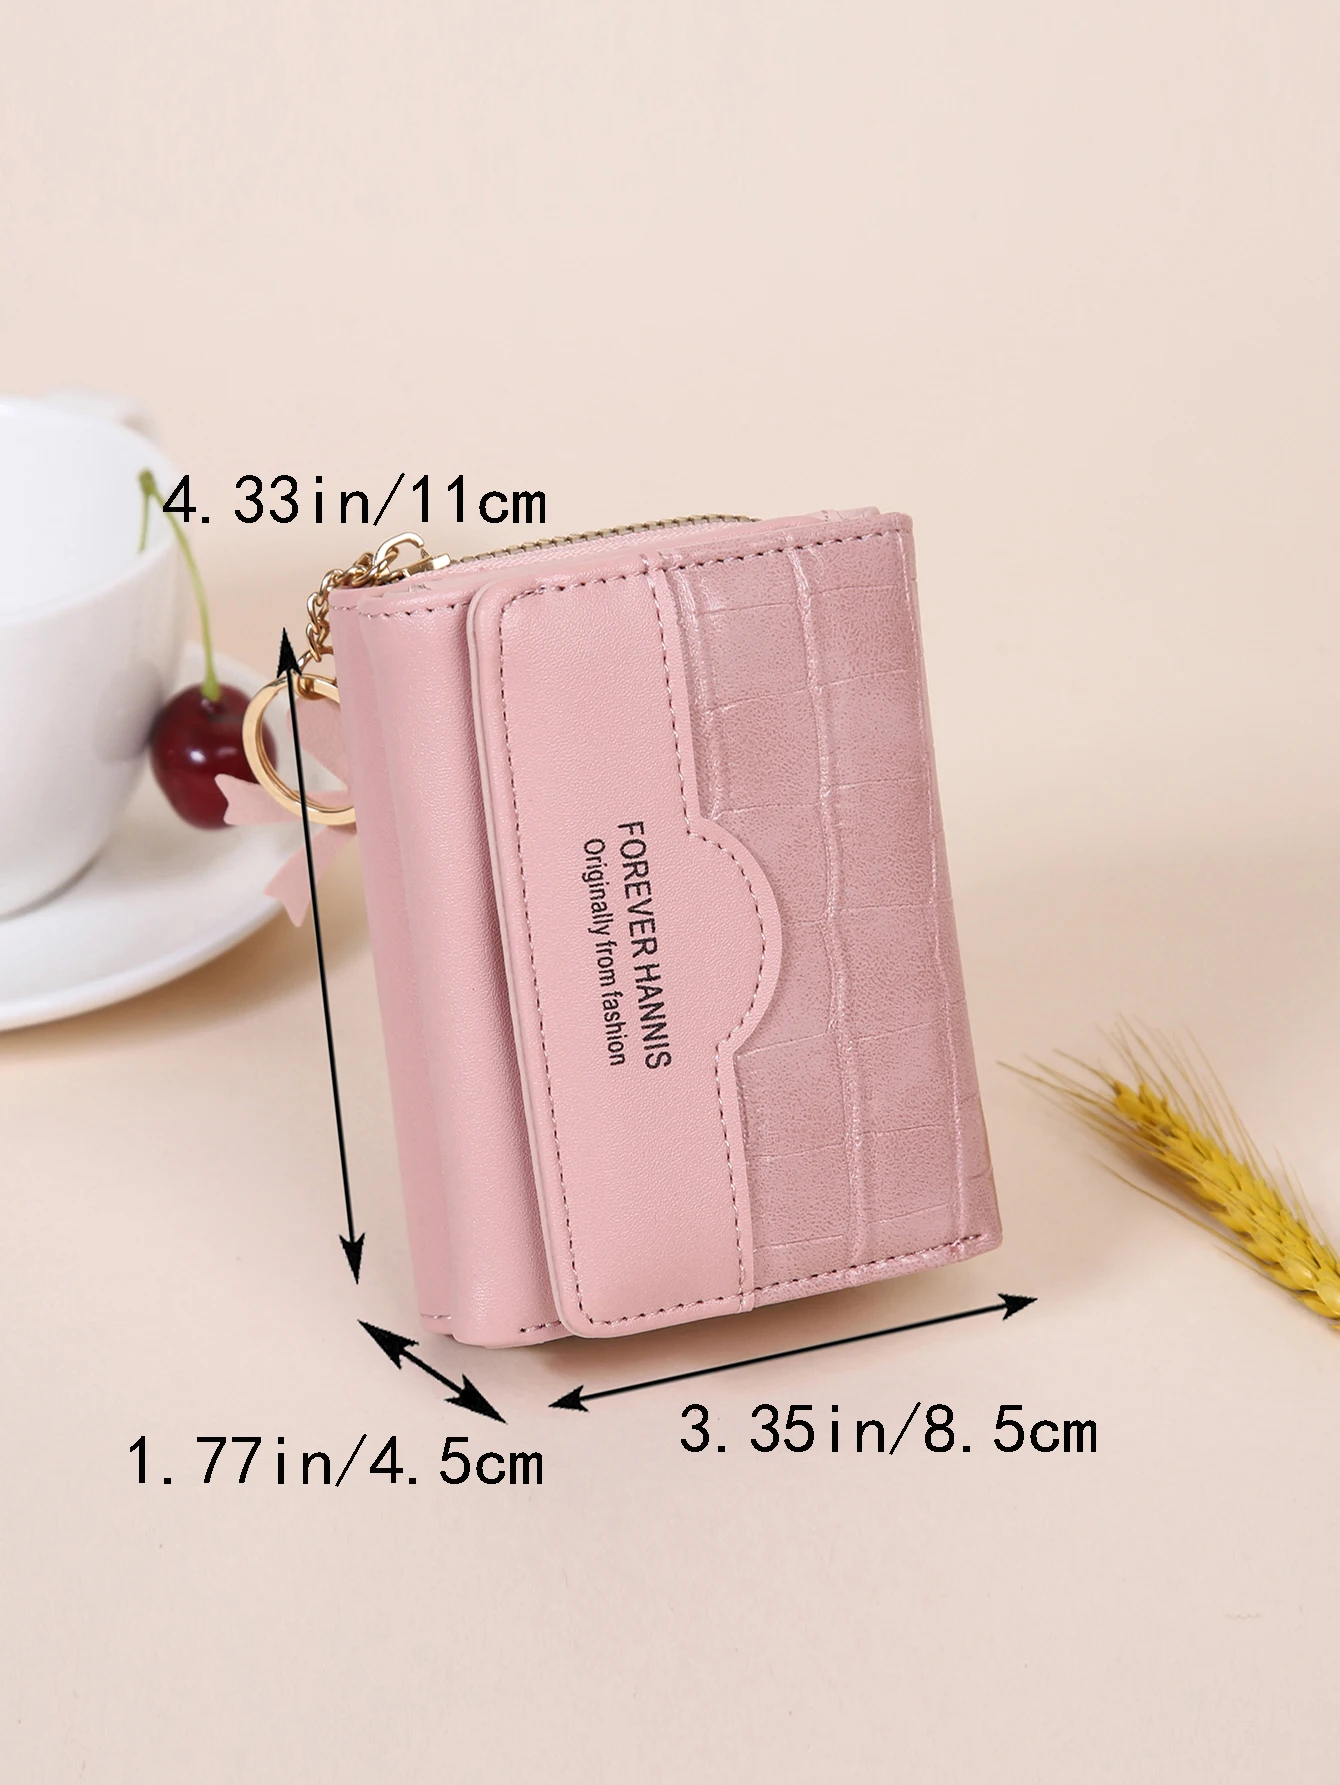 Geometric Pattern Long Wallet Womens Luminous Multi Card Slot Card Case  Womens Clutch With Lanyard, 90 Days Buyer Protection